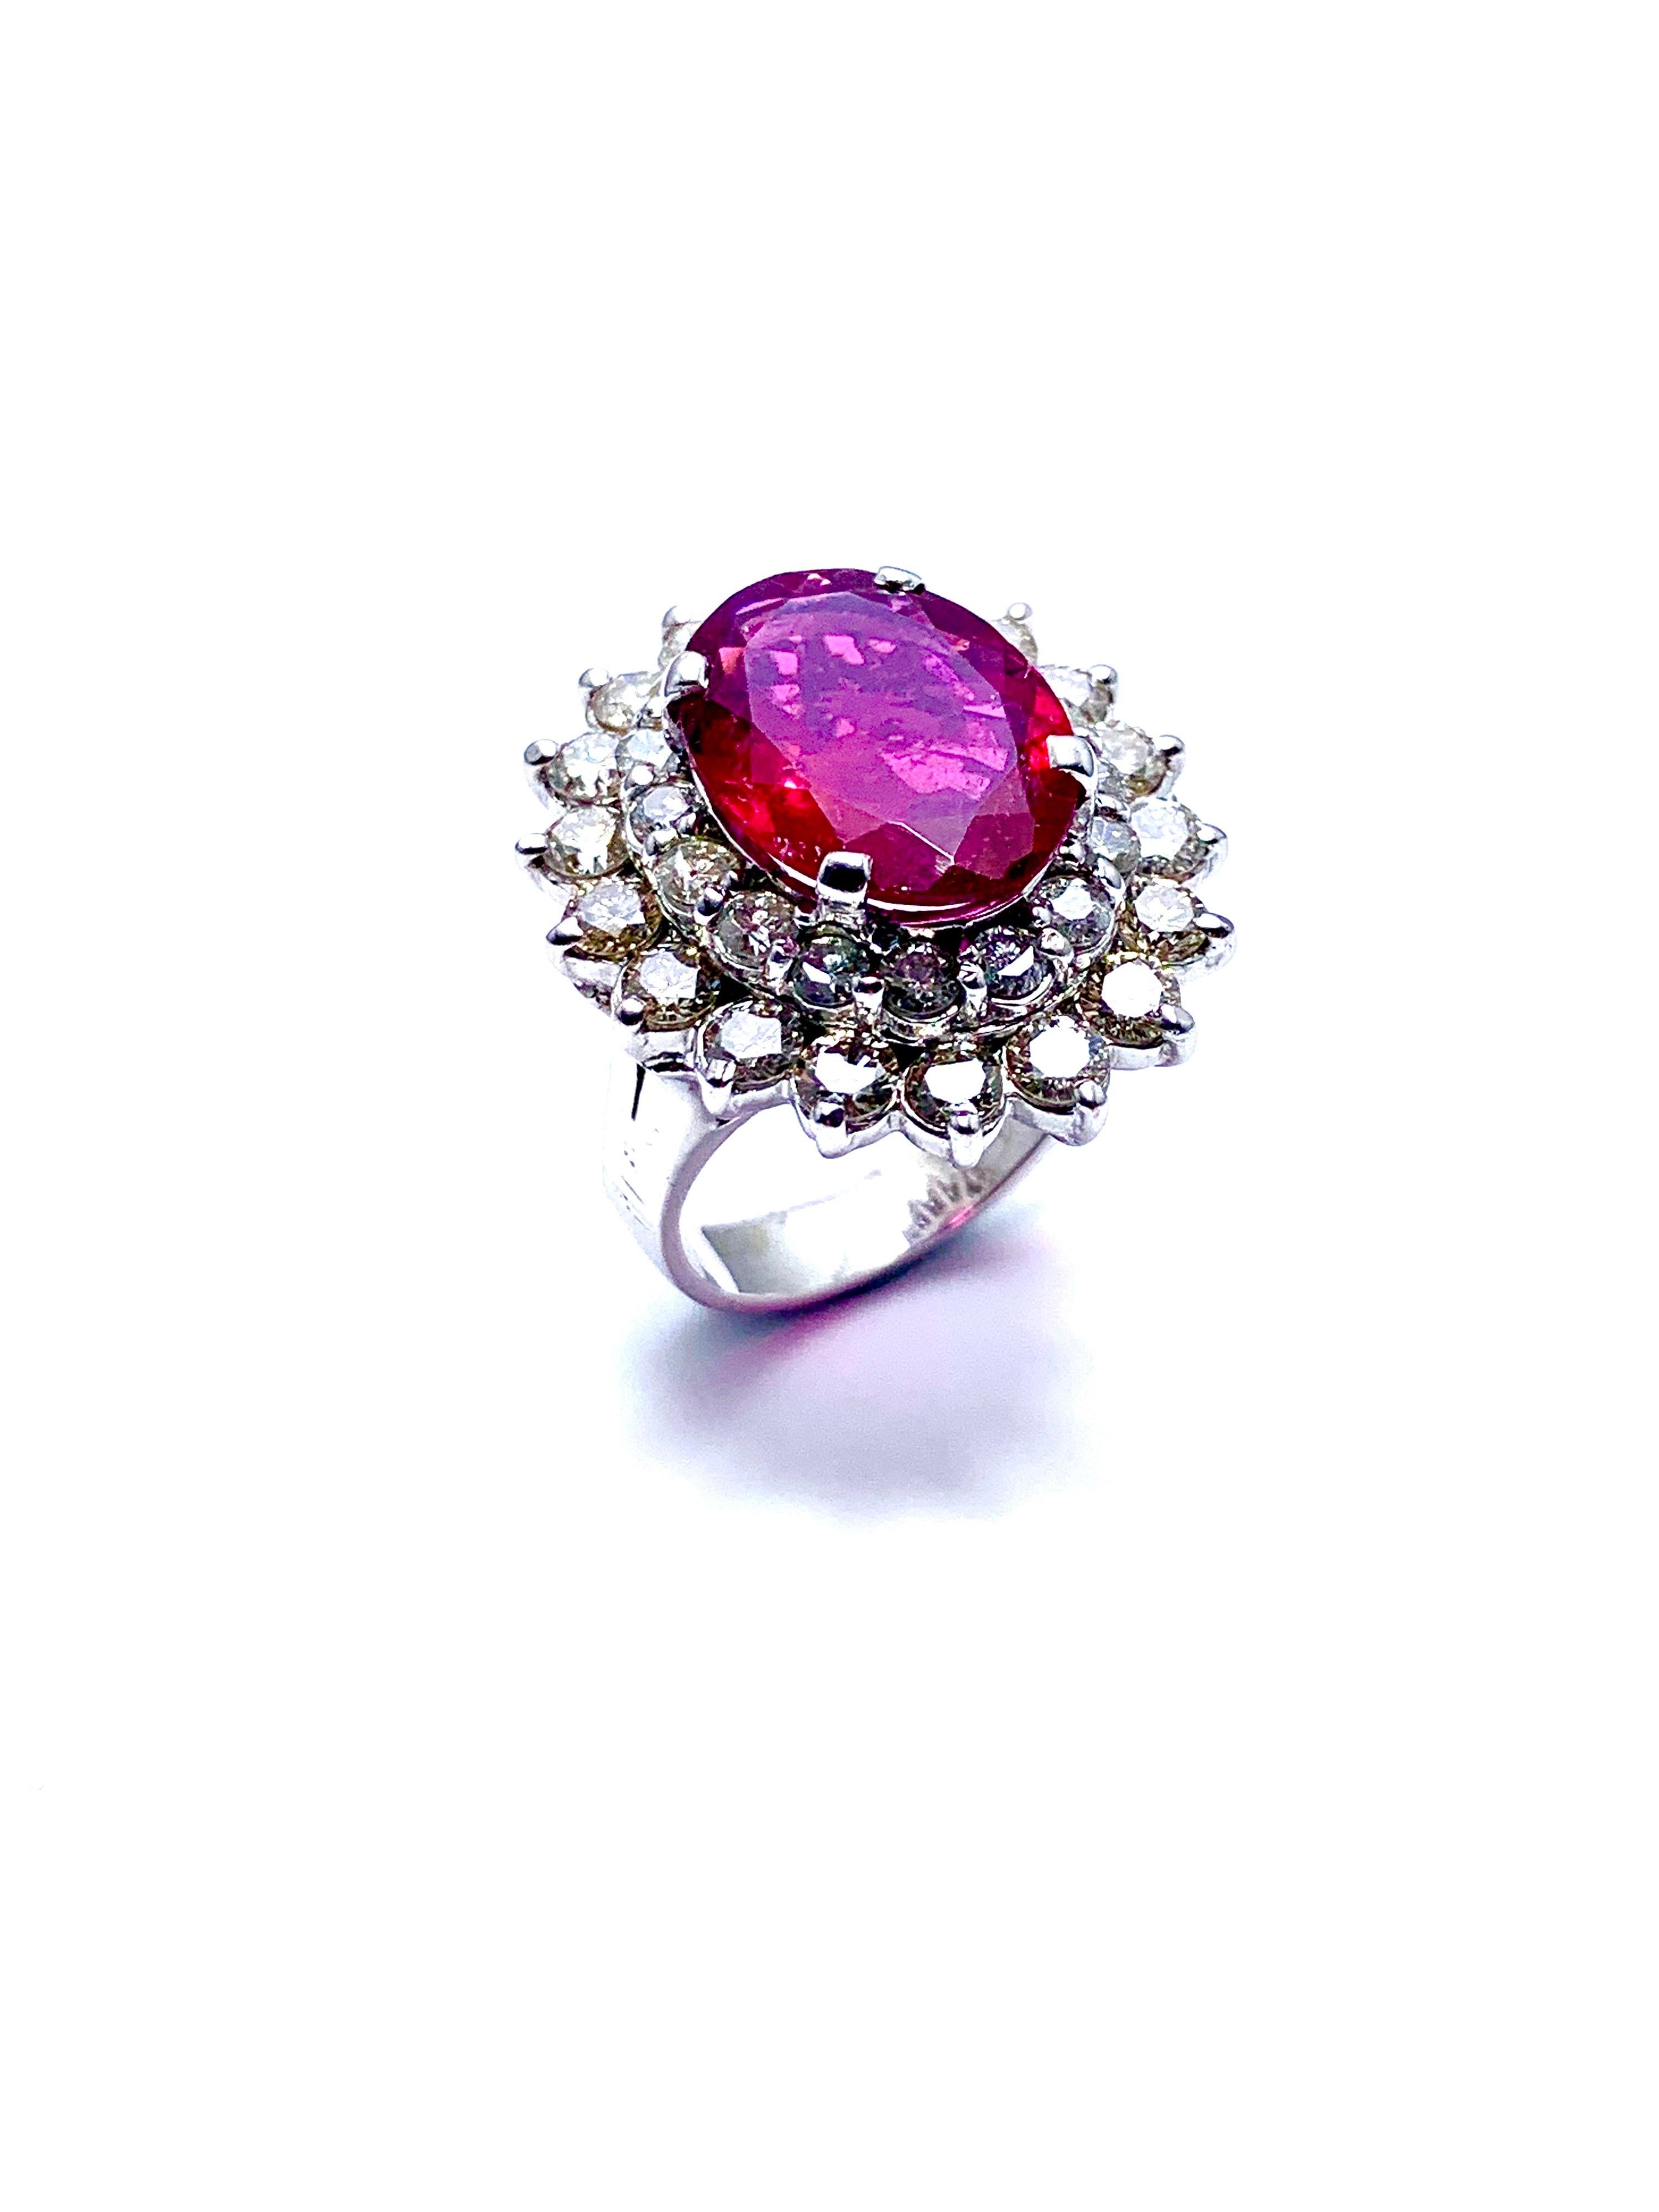 A gorgeous Rubellite Tourmaline and Diamond ring!  The vibrant faceted oval 4.12 carat Rubellite is set in four prongs, with two rows of of round brilliant cut Diamonds totaling 2.60 carats.  The diamonds are H-I color, SI clarity.  The ring